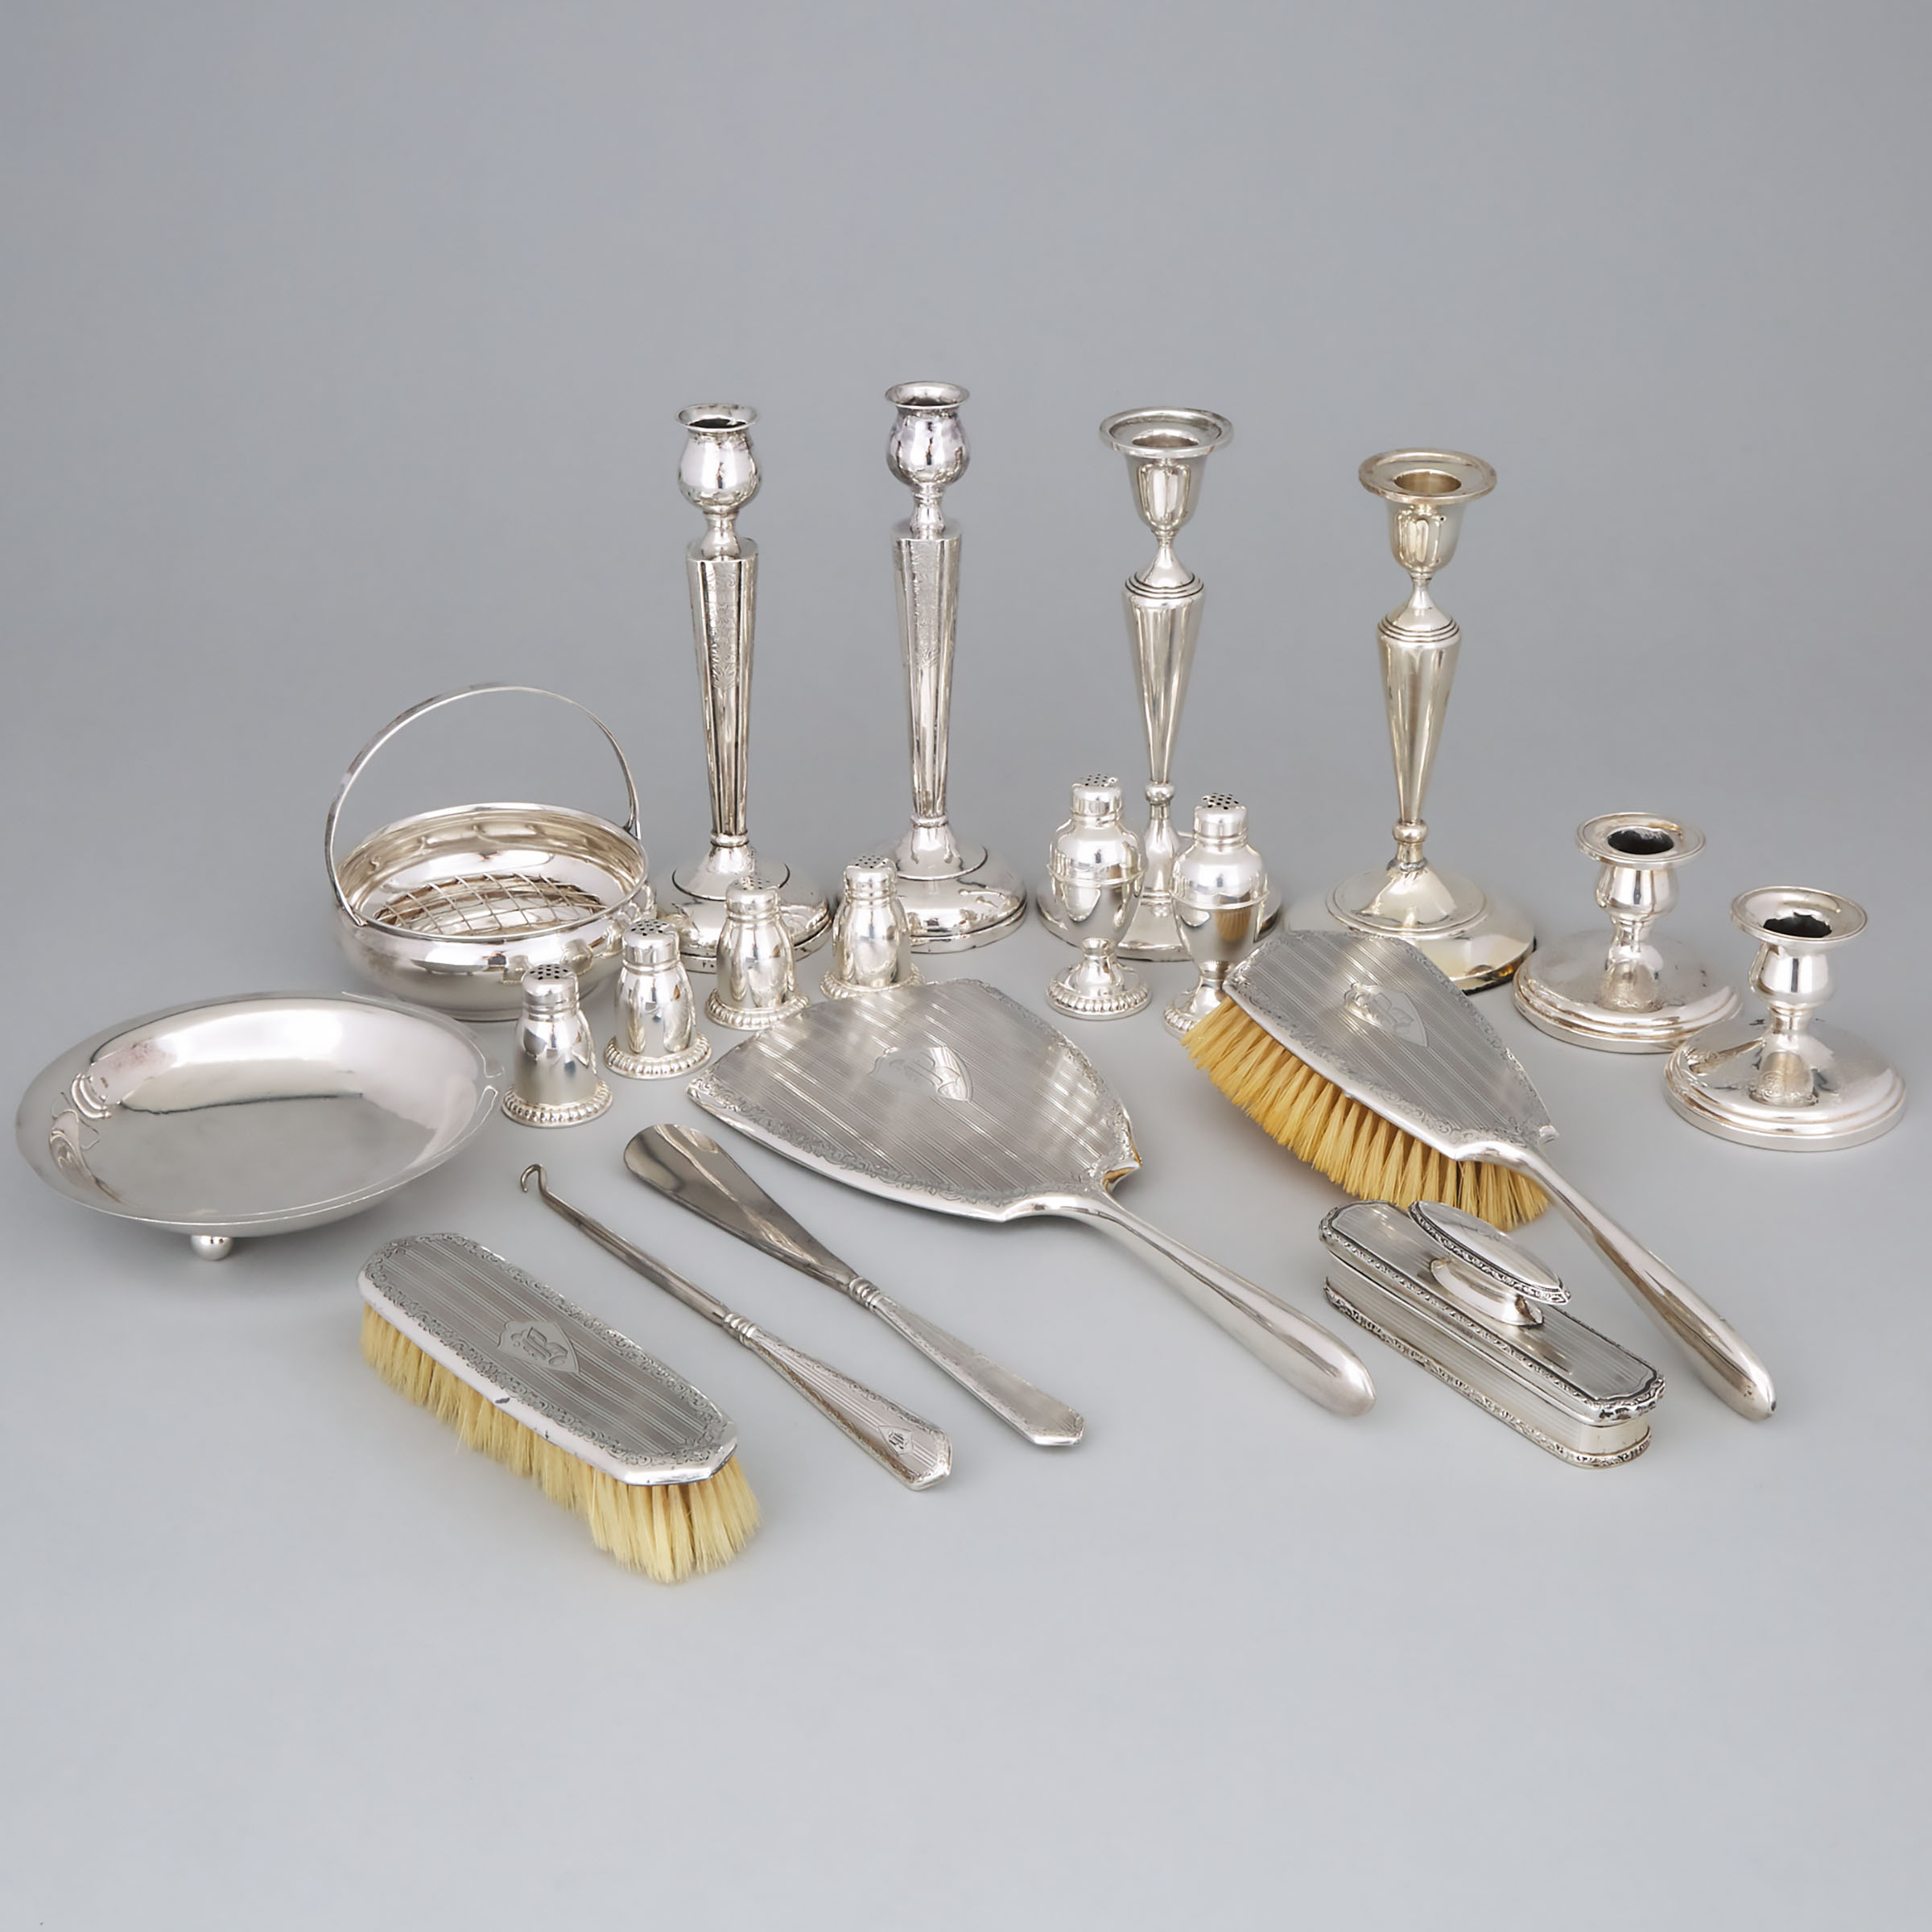 Group of English, Canadian, and American Silver, 20th century